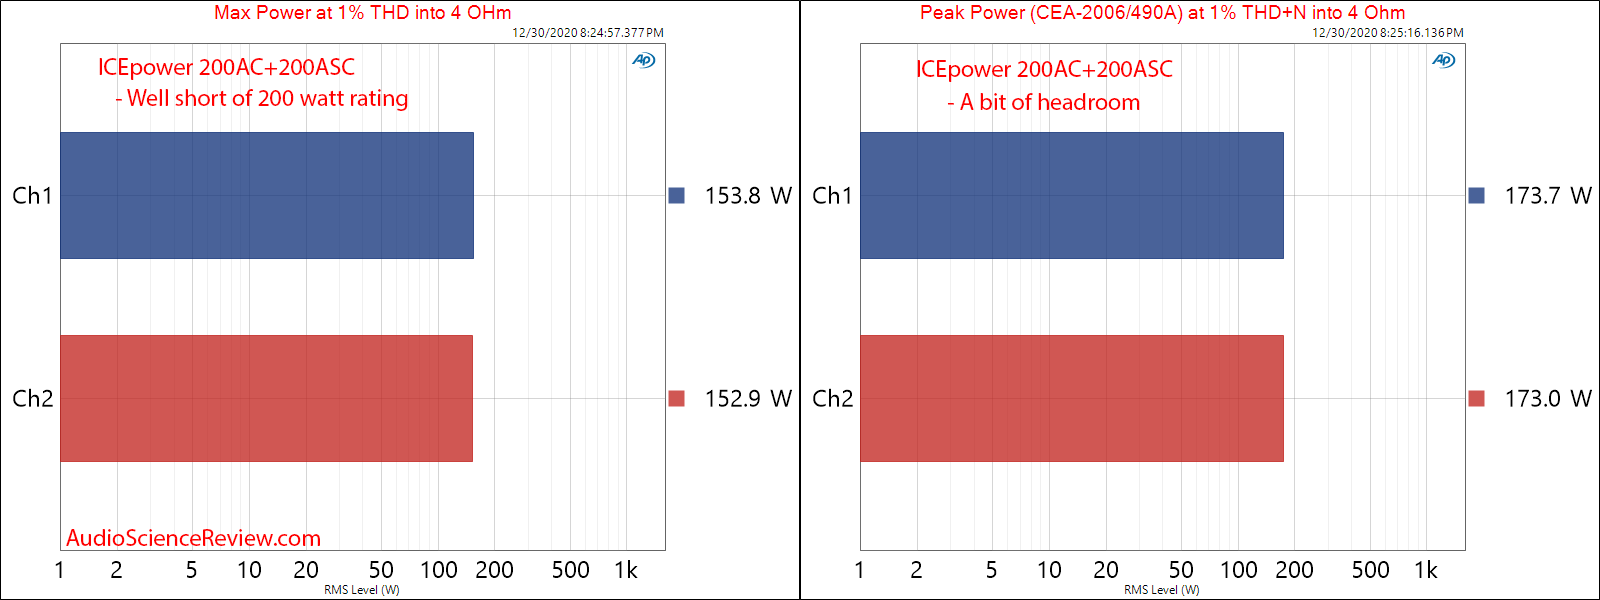 ICEpower 200AC 200ASC Measurements Max and Peak Power.png